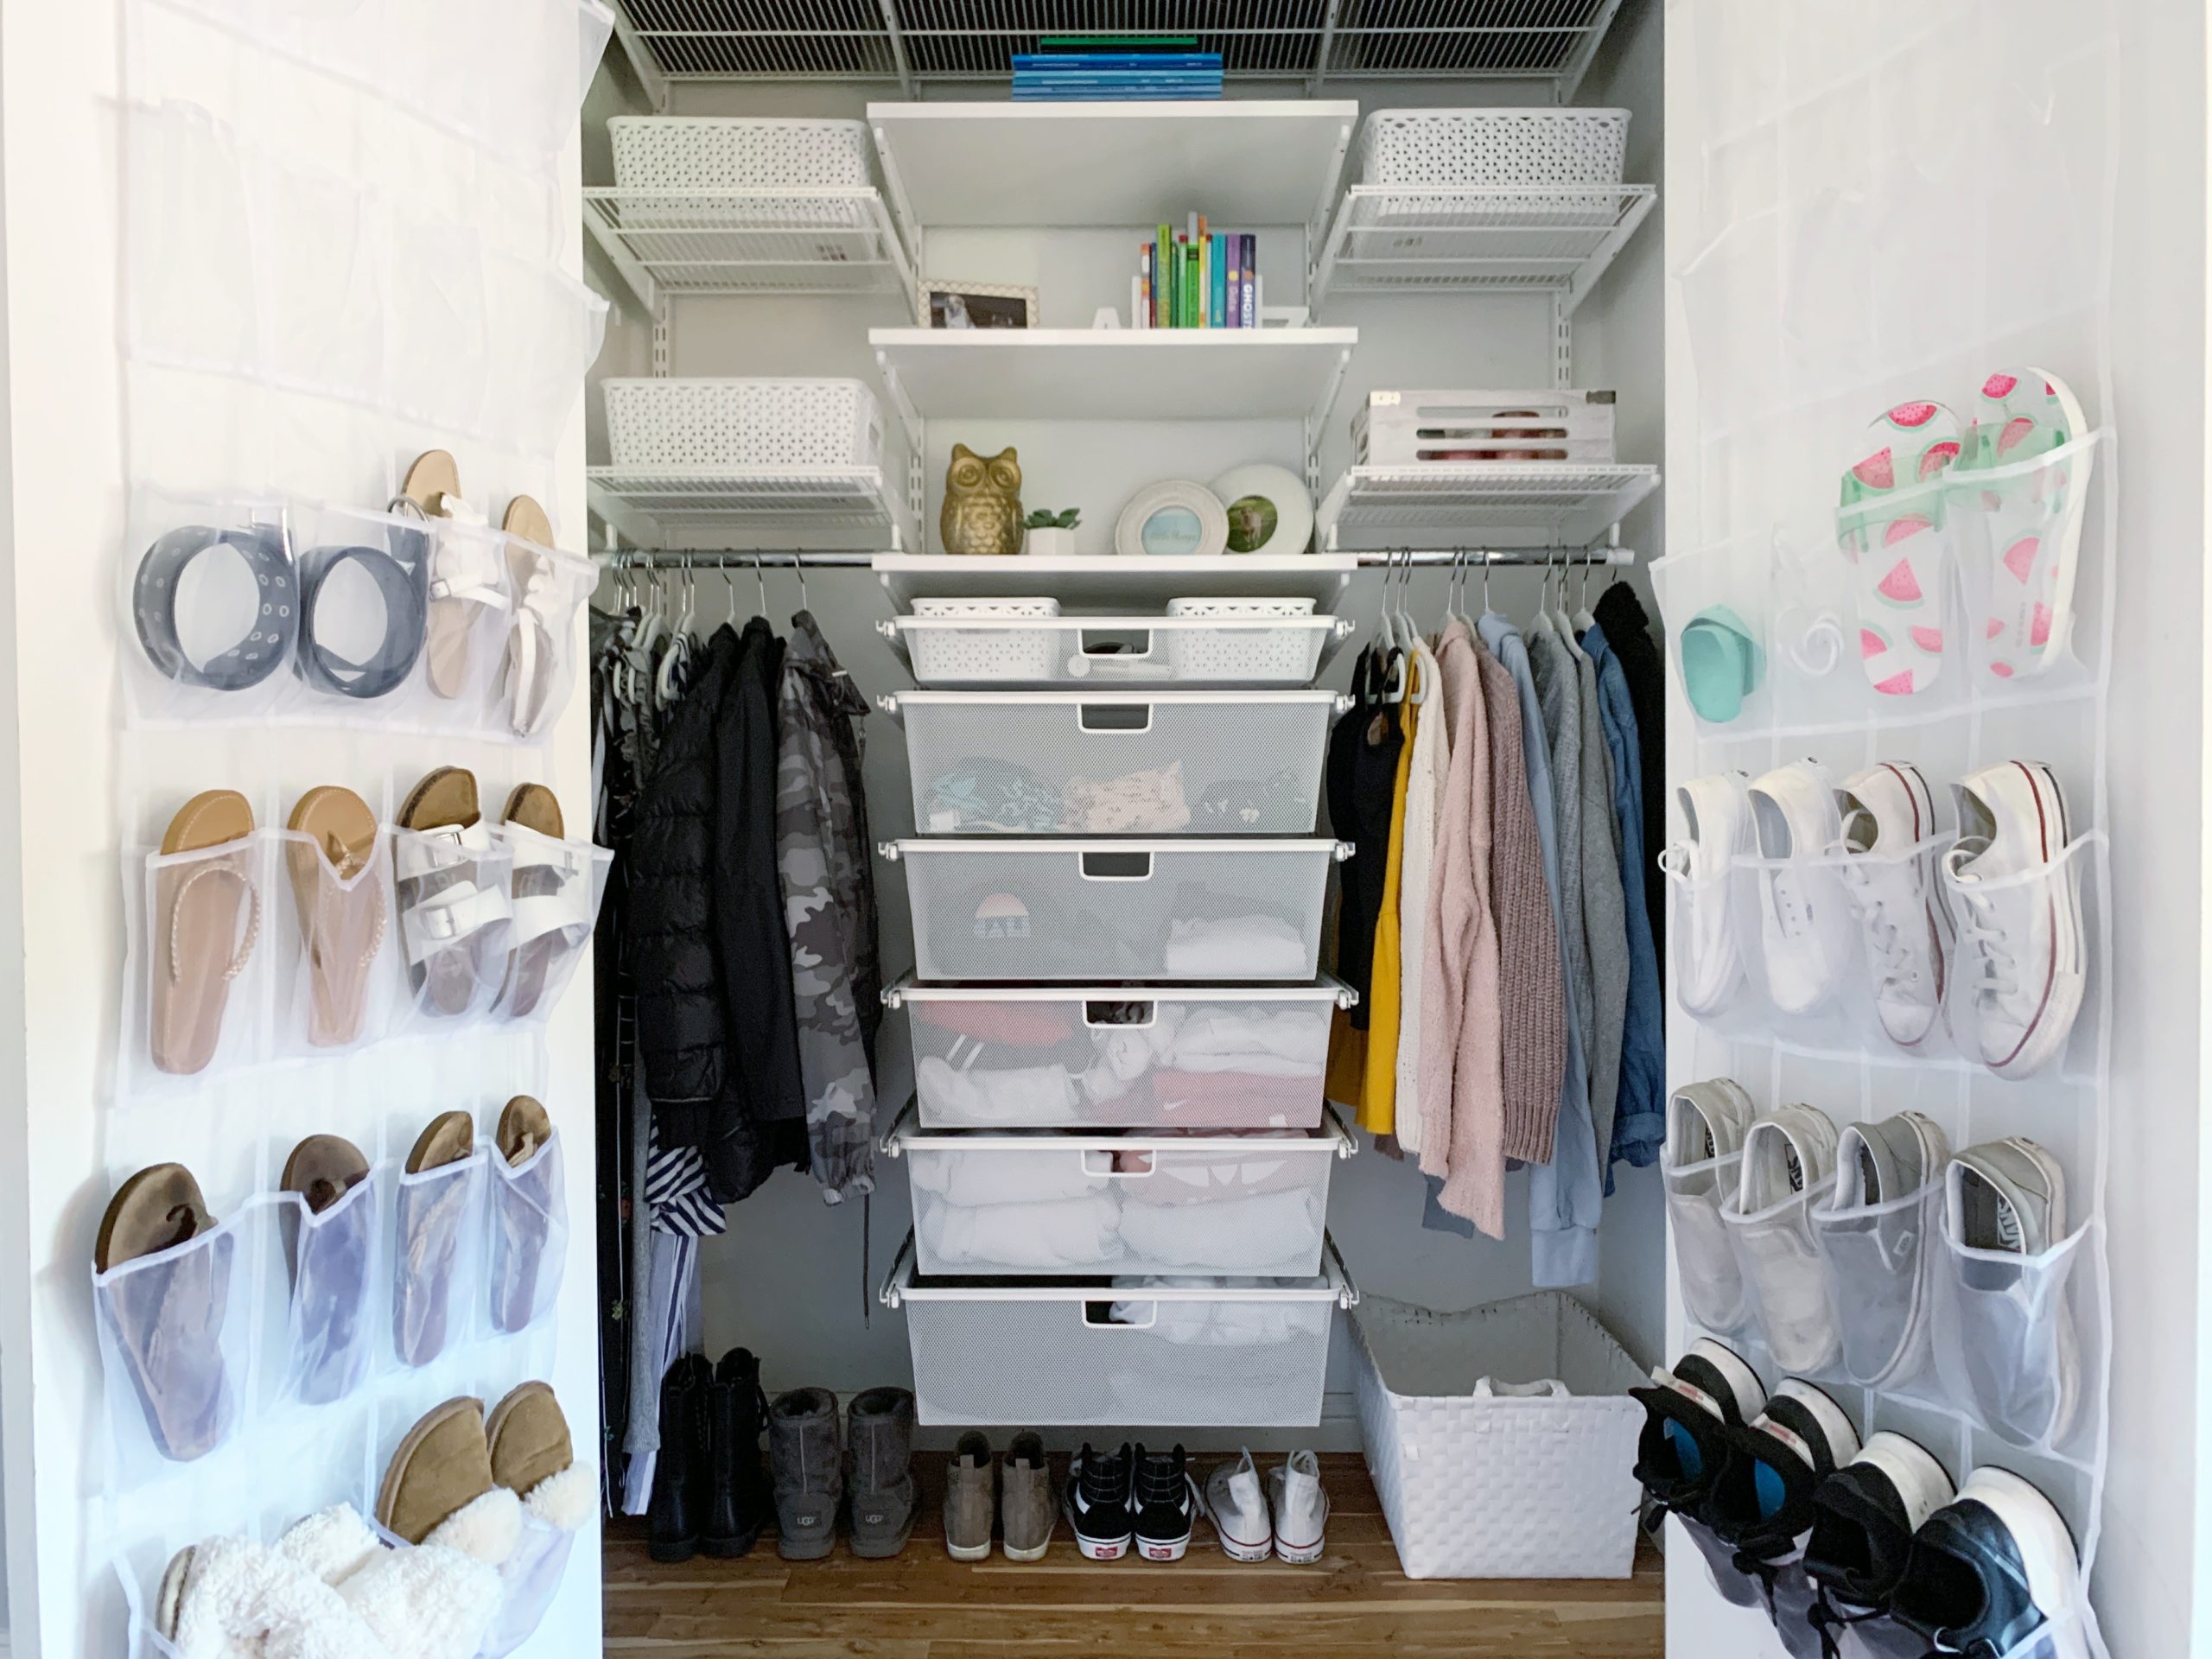 https://simplyorganized.me/wp-content/uploads/2020/08/teen-closet-after-close-up-scaled.jpg